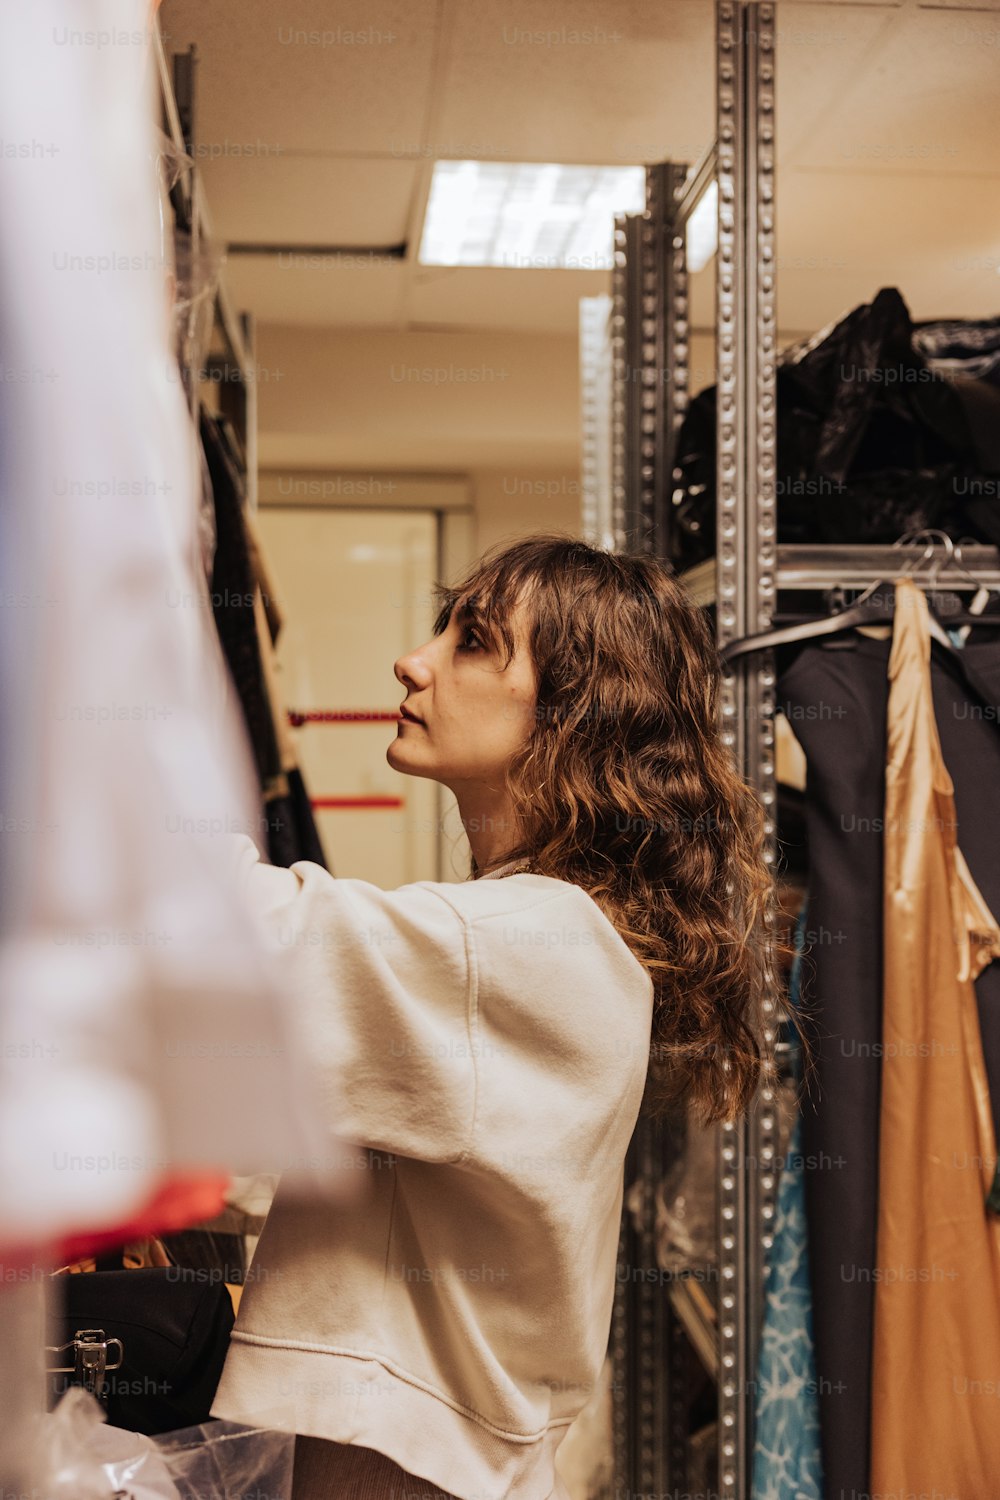 a woman in a white top is looking at a rack of clothes